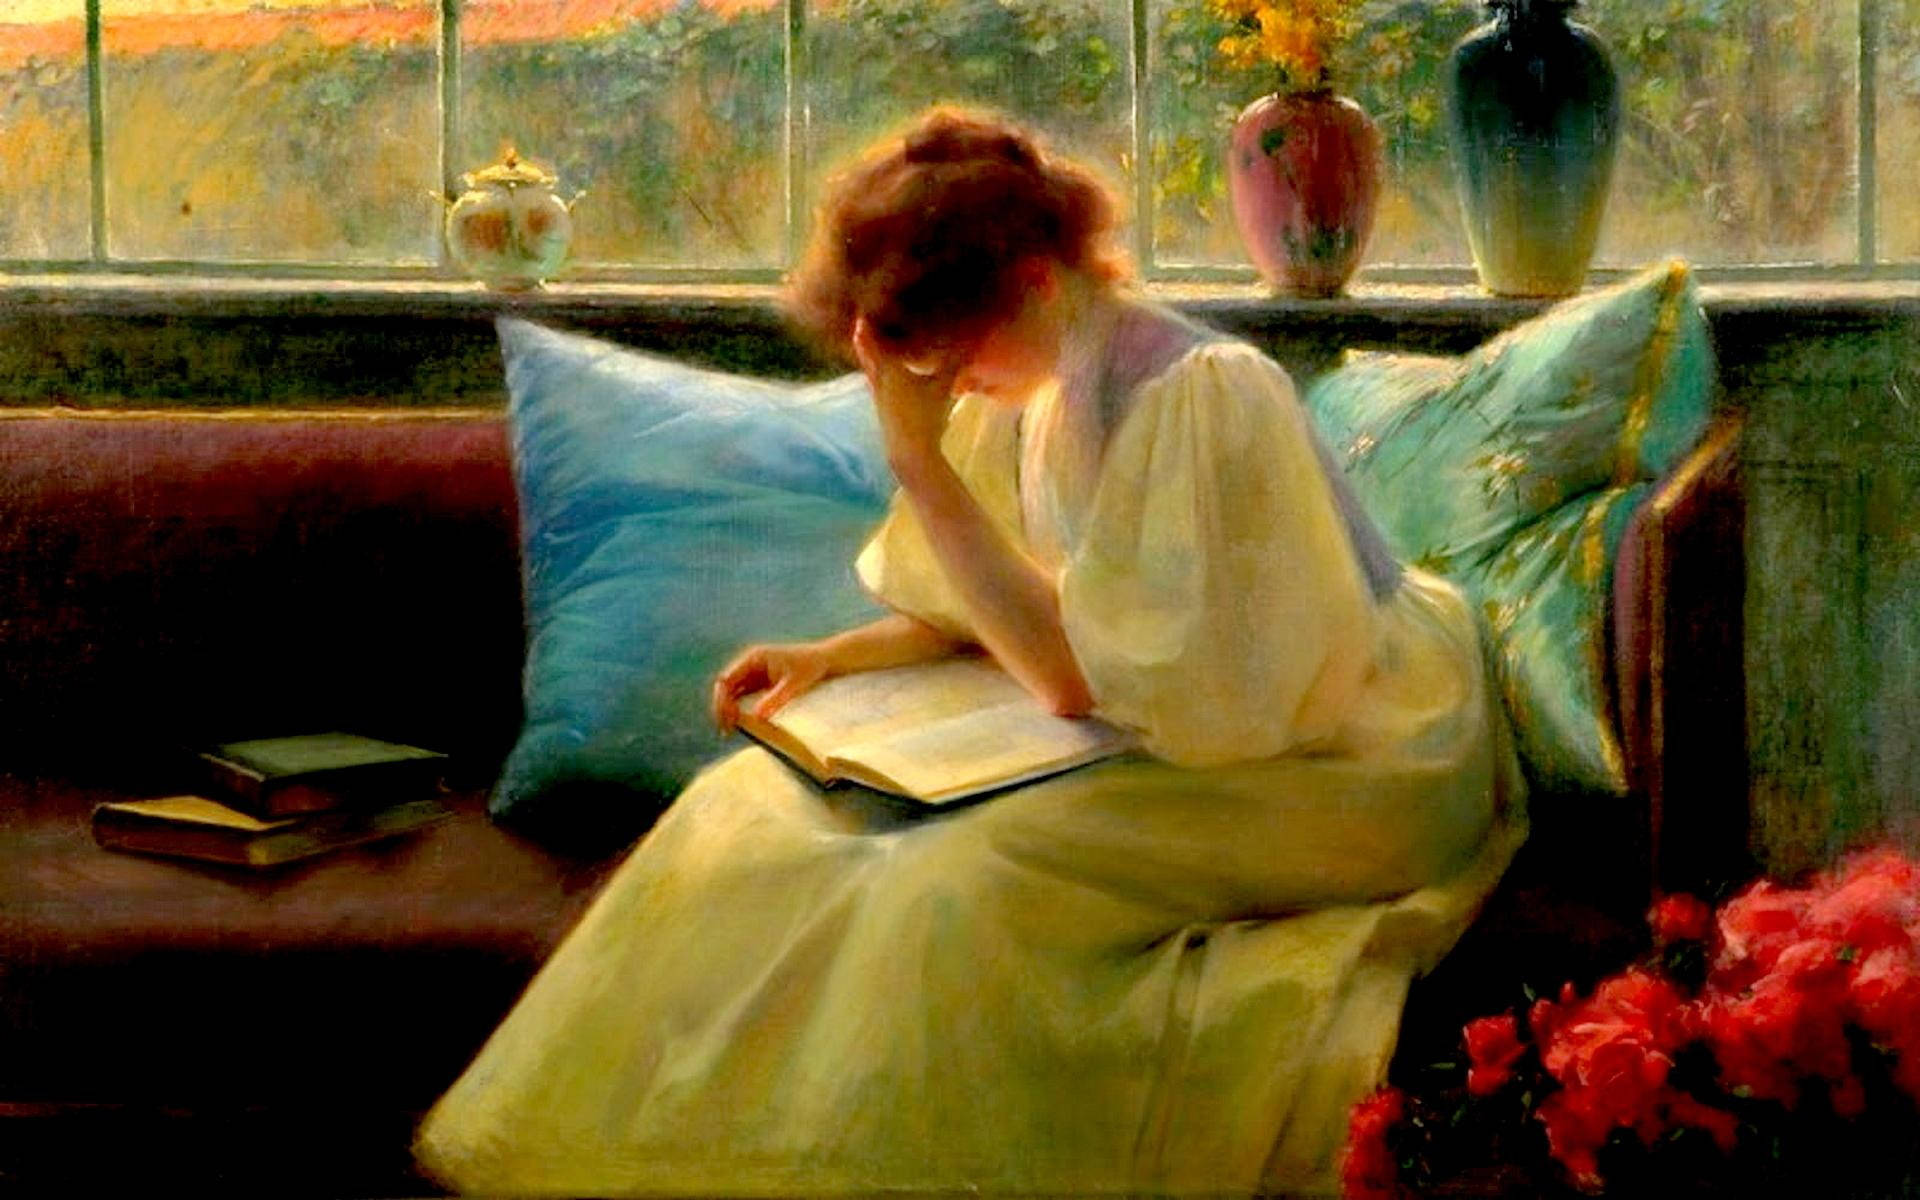 A Woman Engrossed In Reading A Book In An Artistic Painting. Background